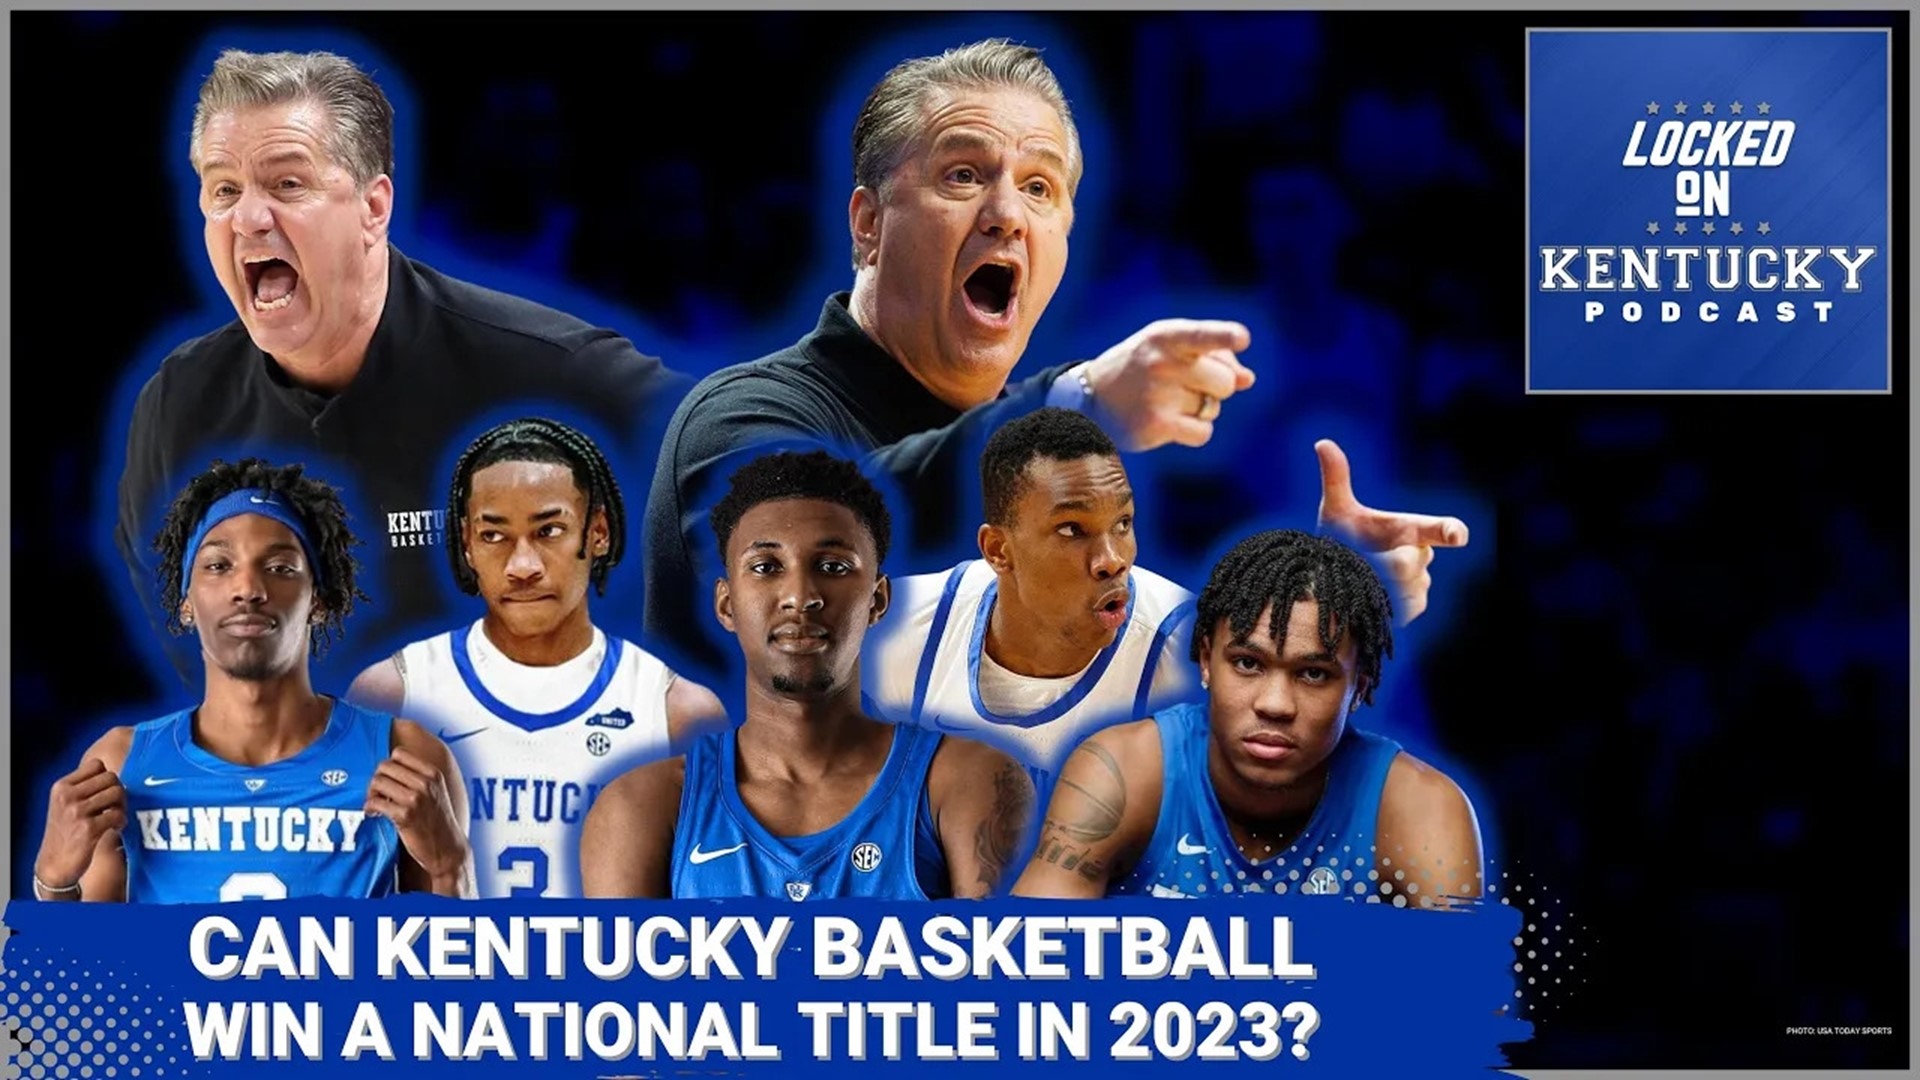 According to recent historical trends, Kentucky basketball won't win a national title this upcoming season.